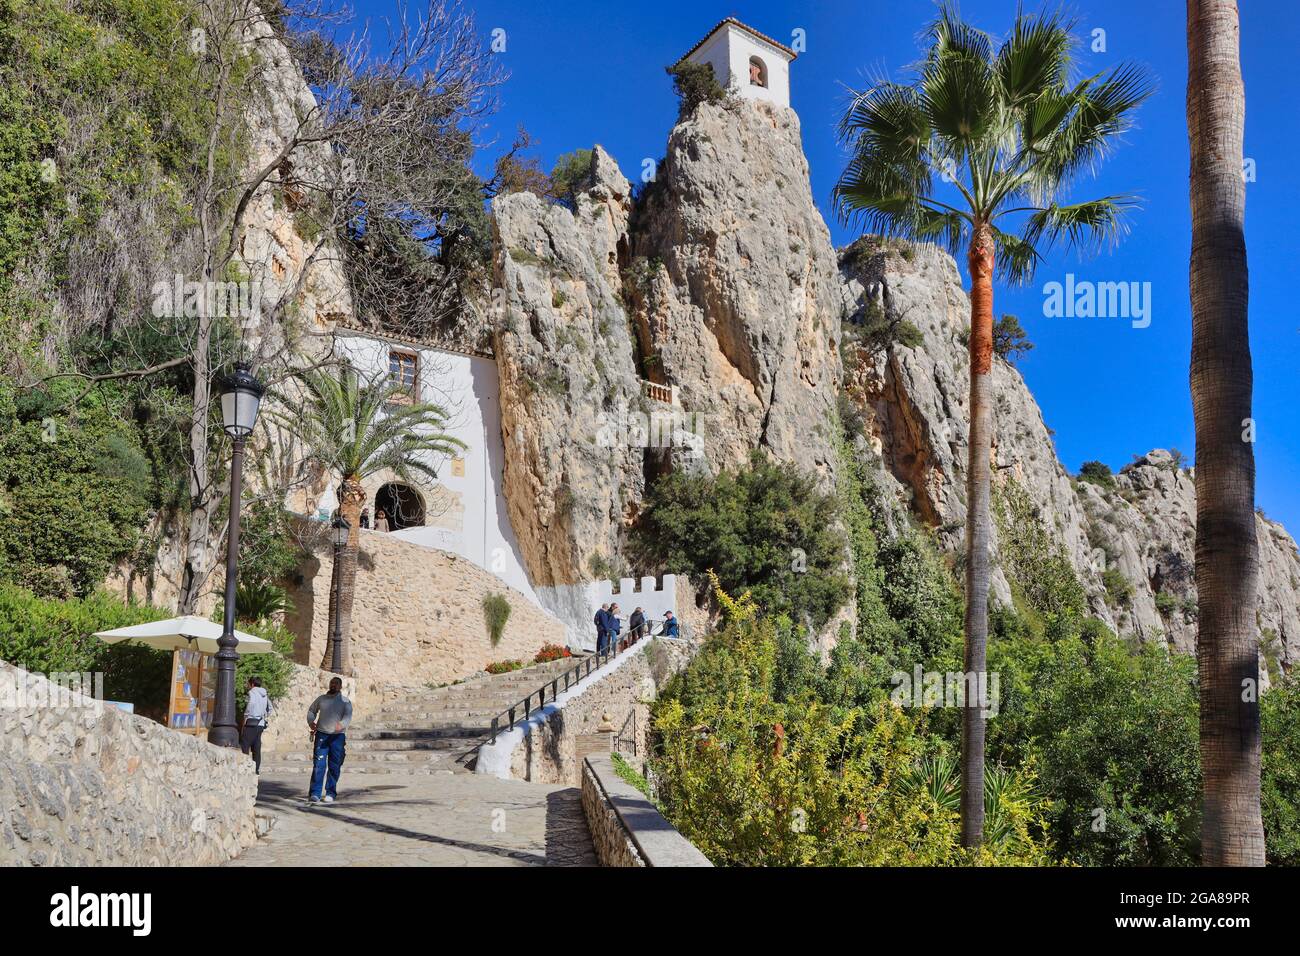 Guadalest village is in the Alicante province in the region of Valencia and Murcia, Spain. This is the walkway up to the entrance in the mountain Stock Photo